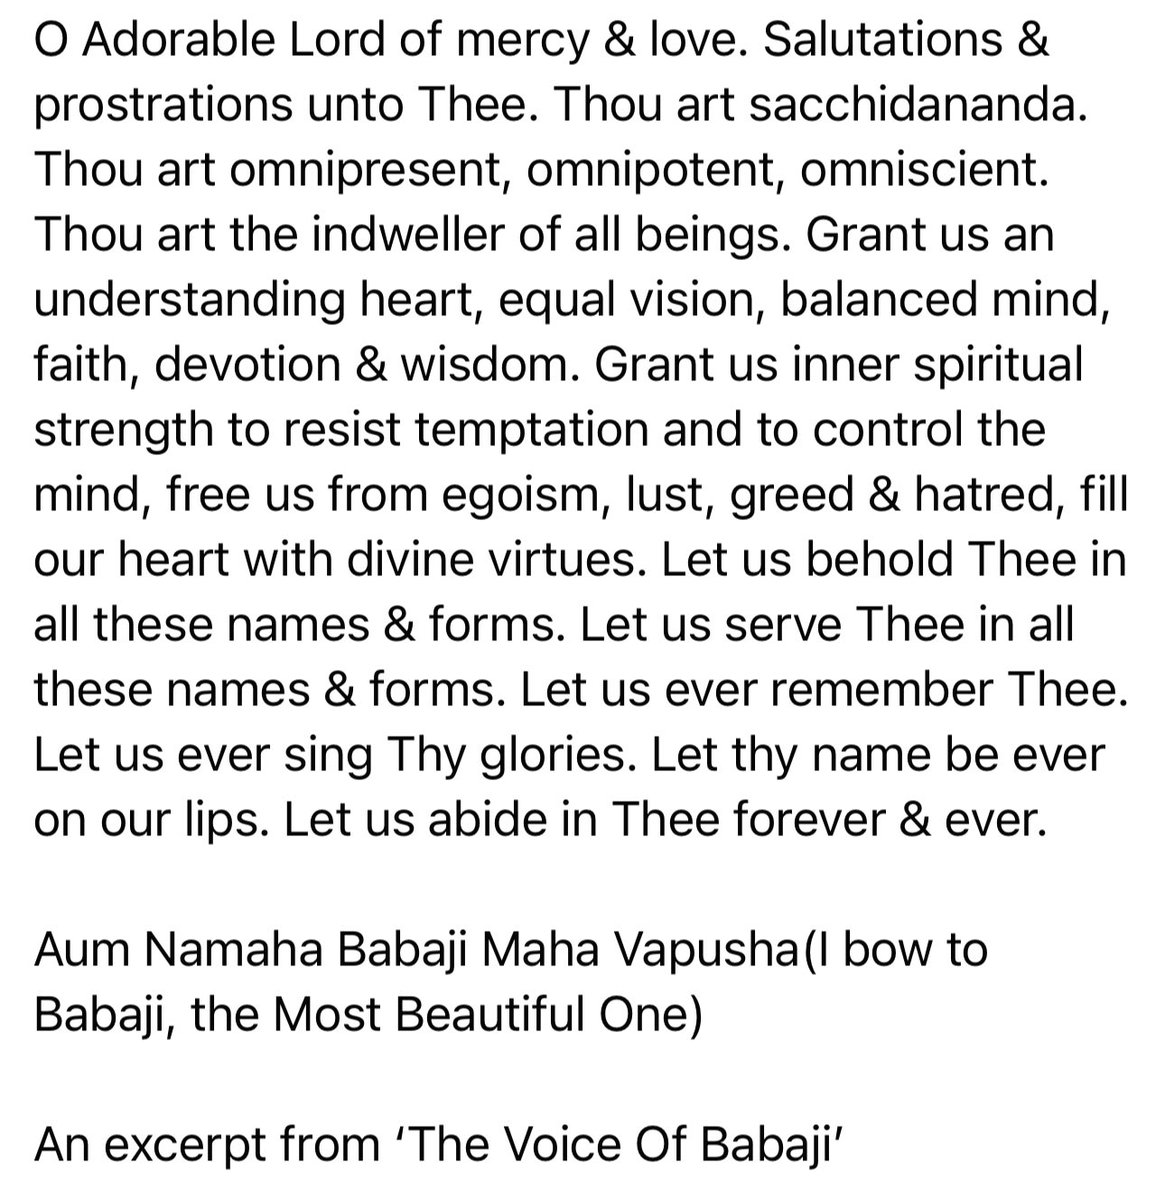 Salutations & prostrations unto Thee. Grant us an understanding heart, equal vision, balanced mind, faith, devotion & wisdom. Grant us inner spiritual strength to resist temptation, to control the mind & fill our heart with divine virtues. Aum Namaha Babaji Maha Vapusha!